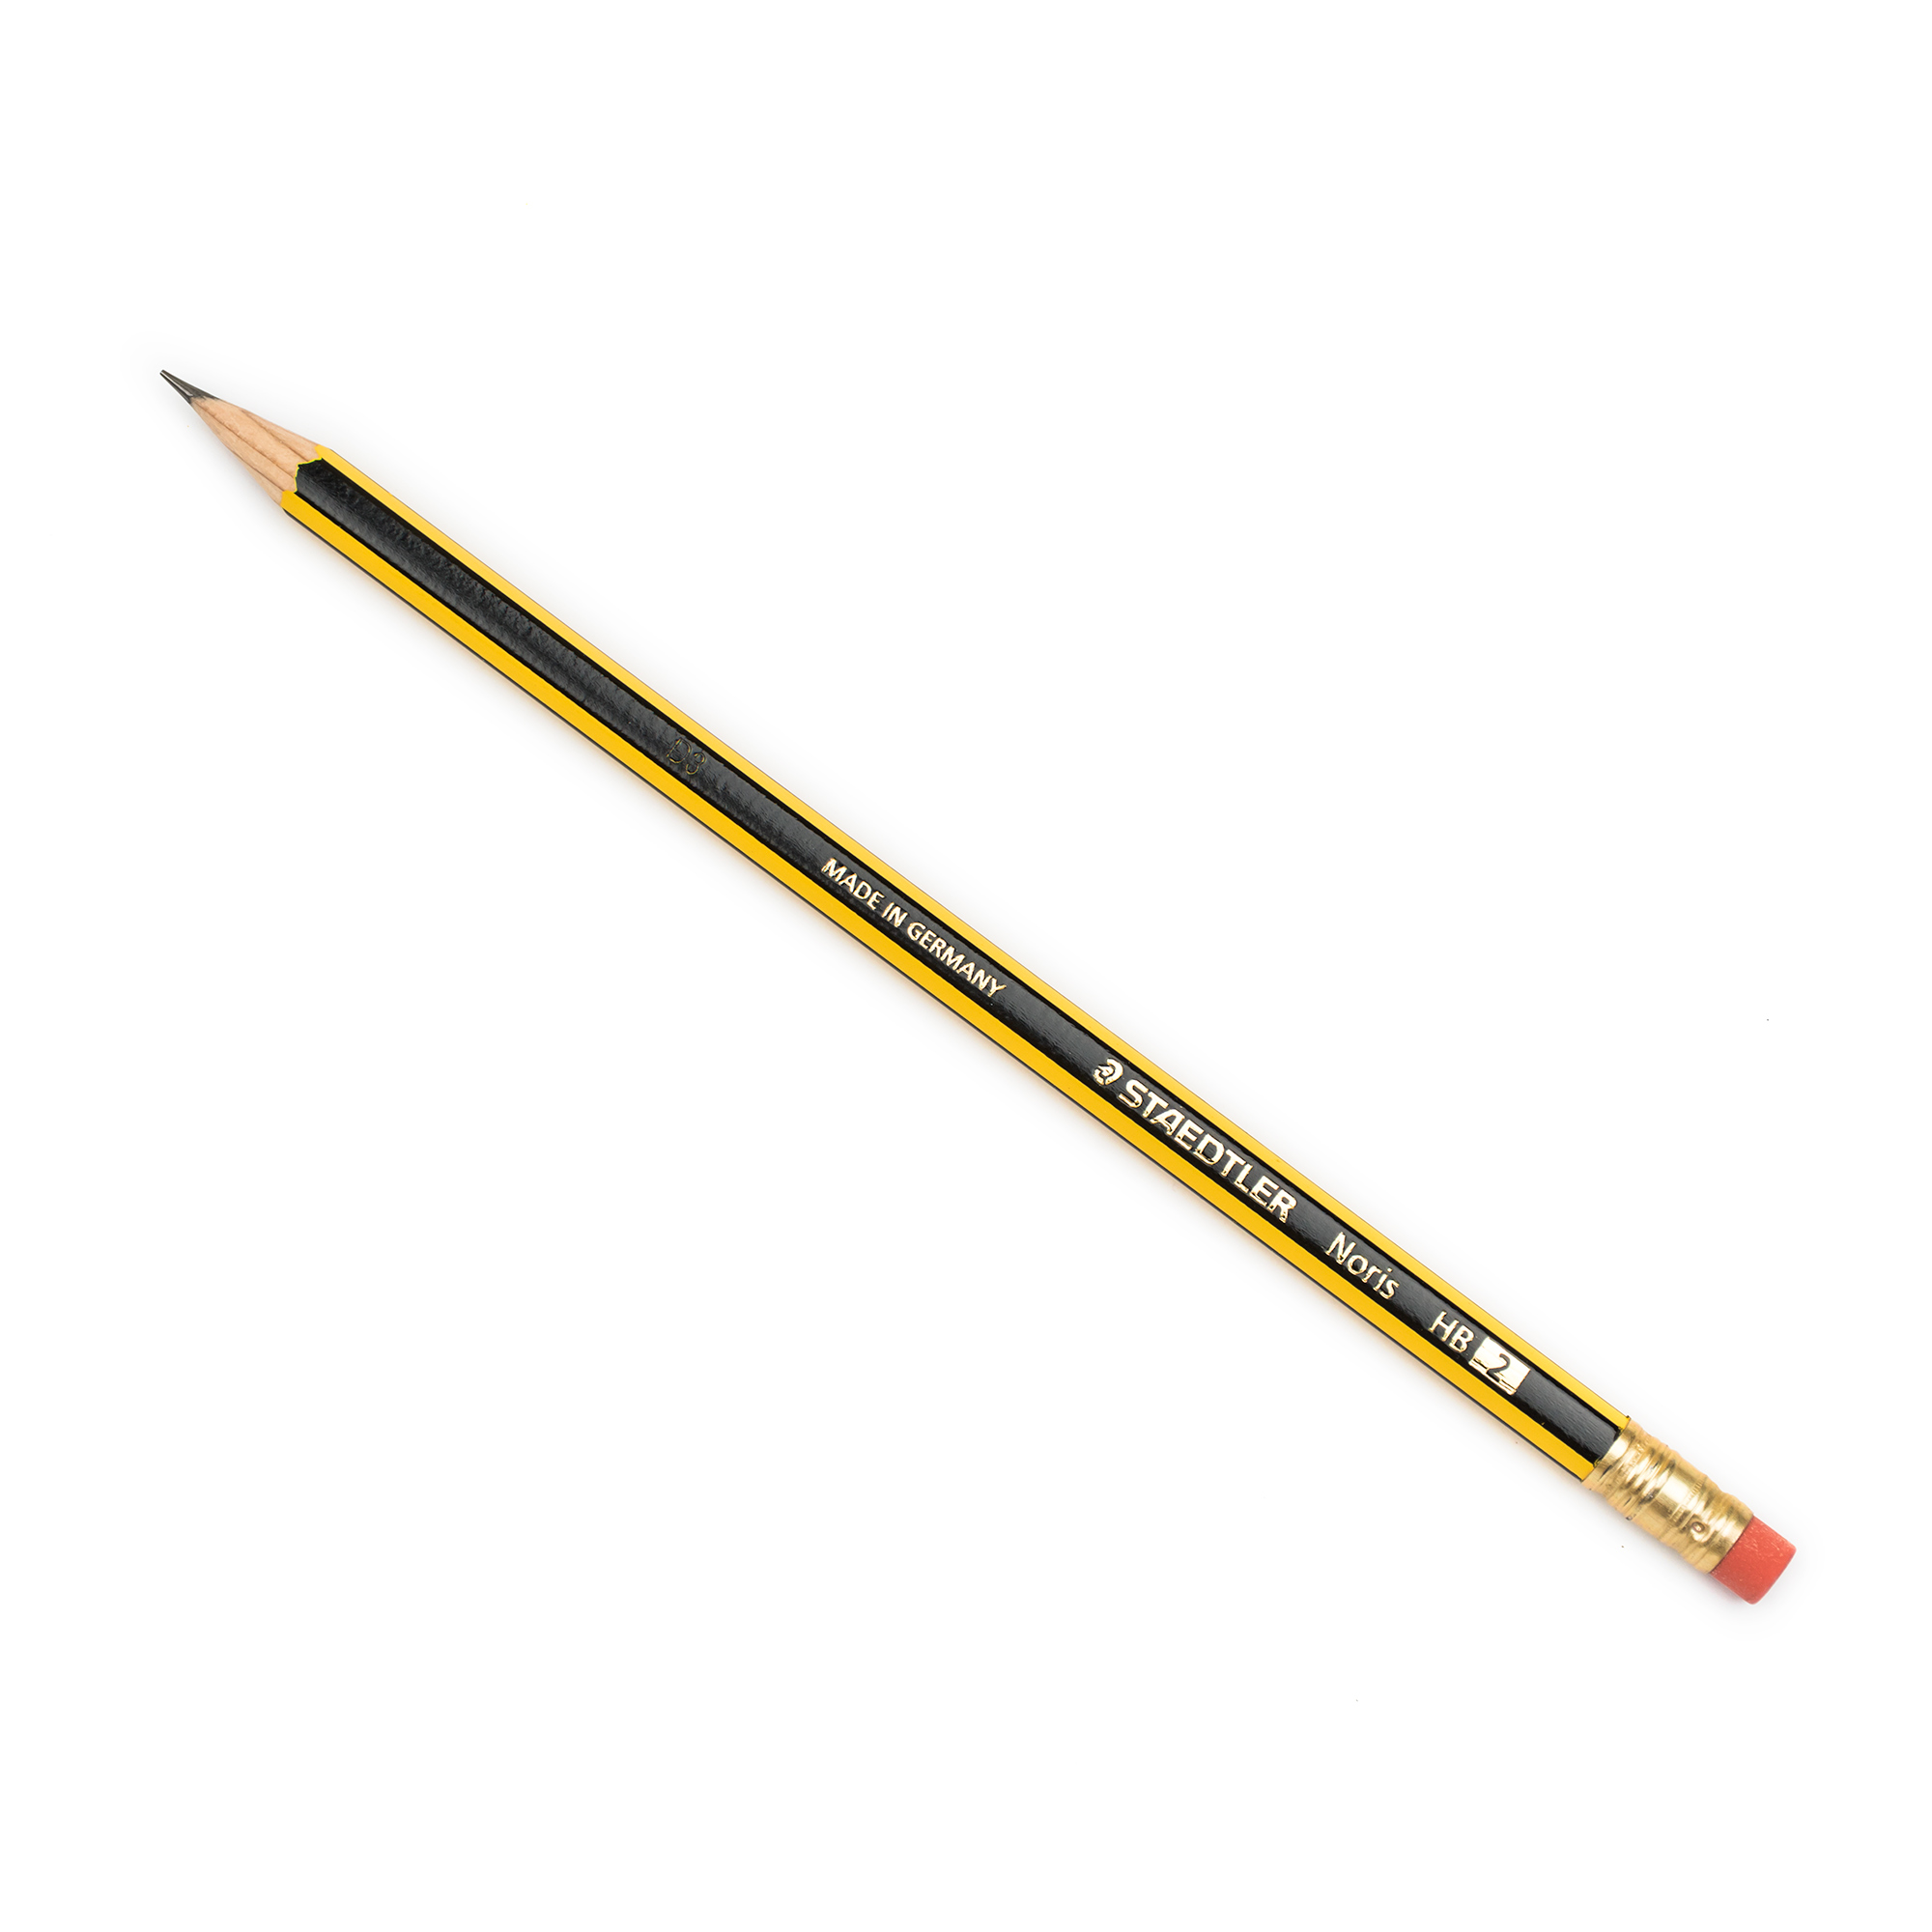 hb pencils with rubber